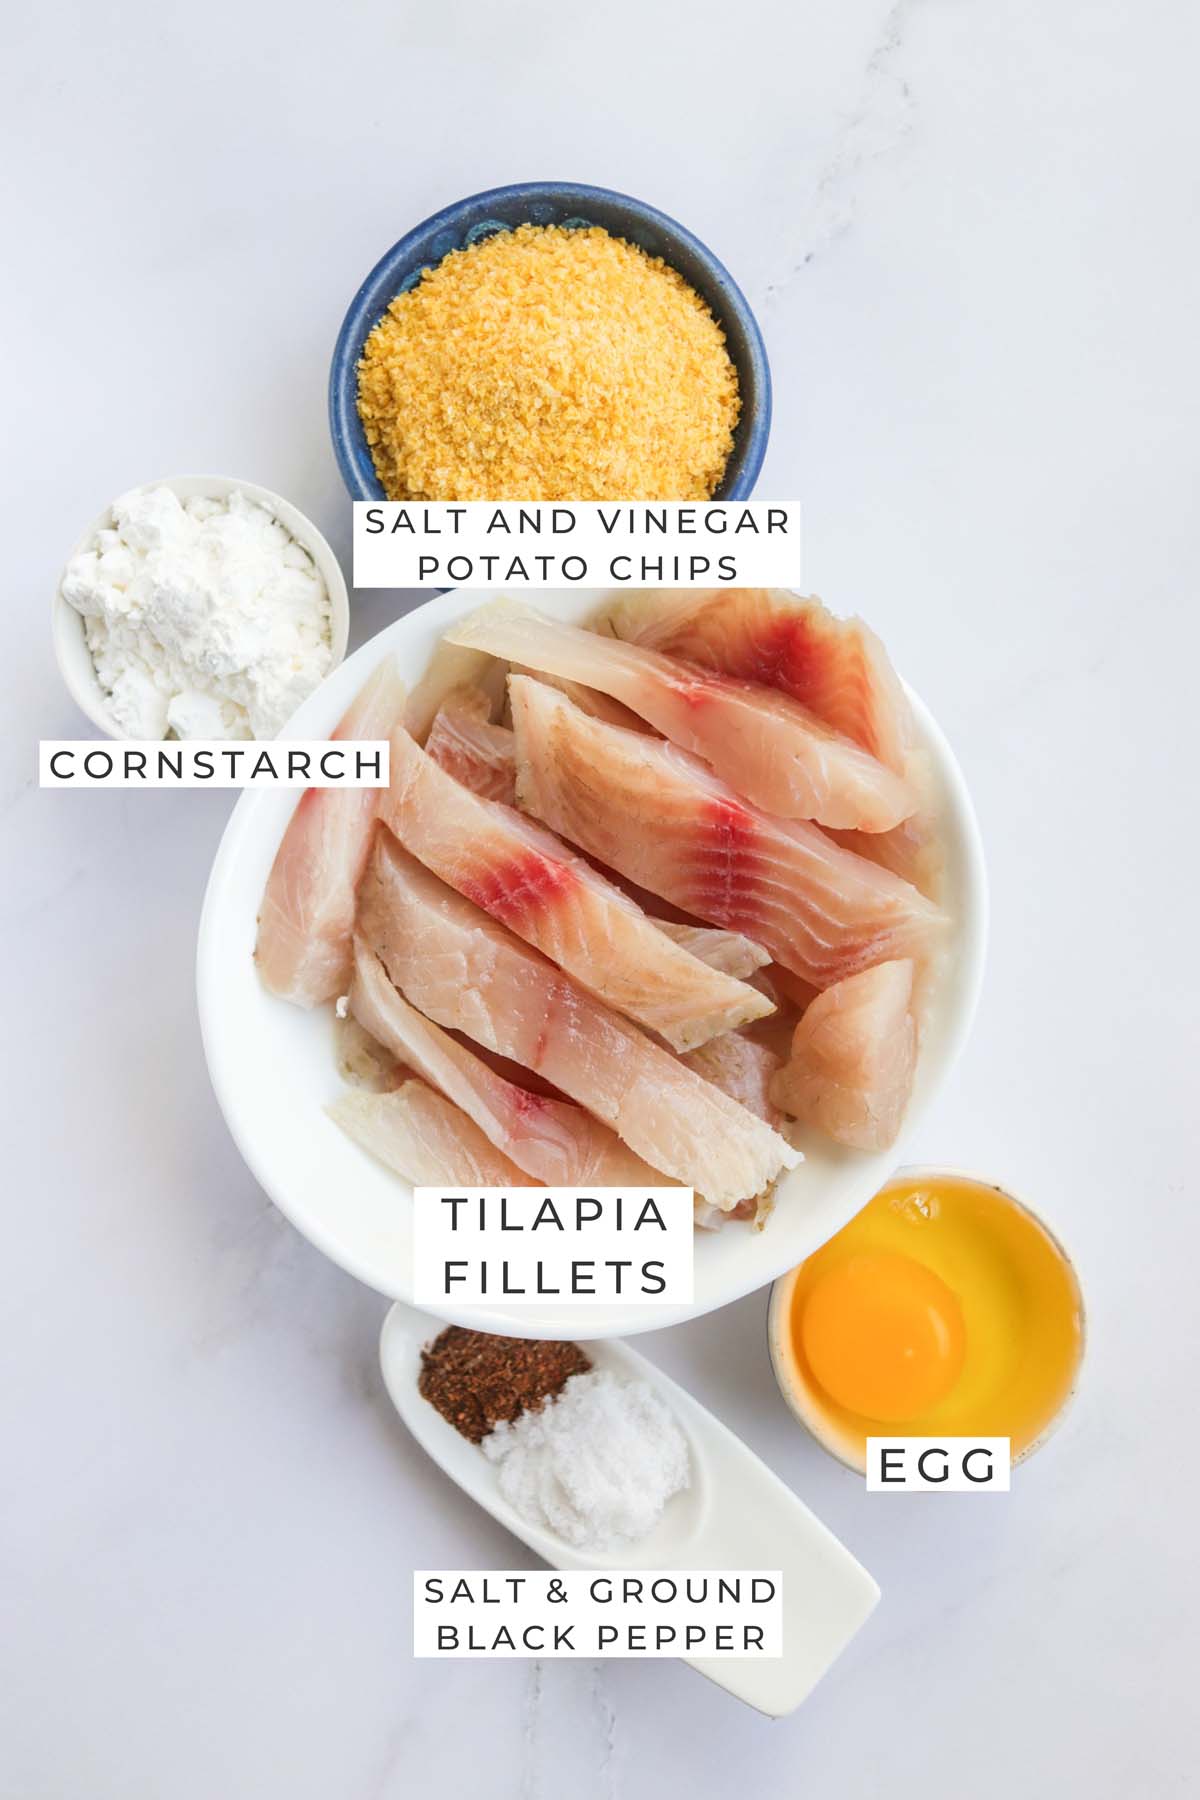 Labeled ingredients for the fish.